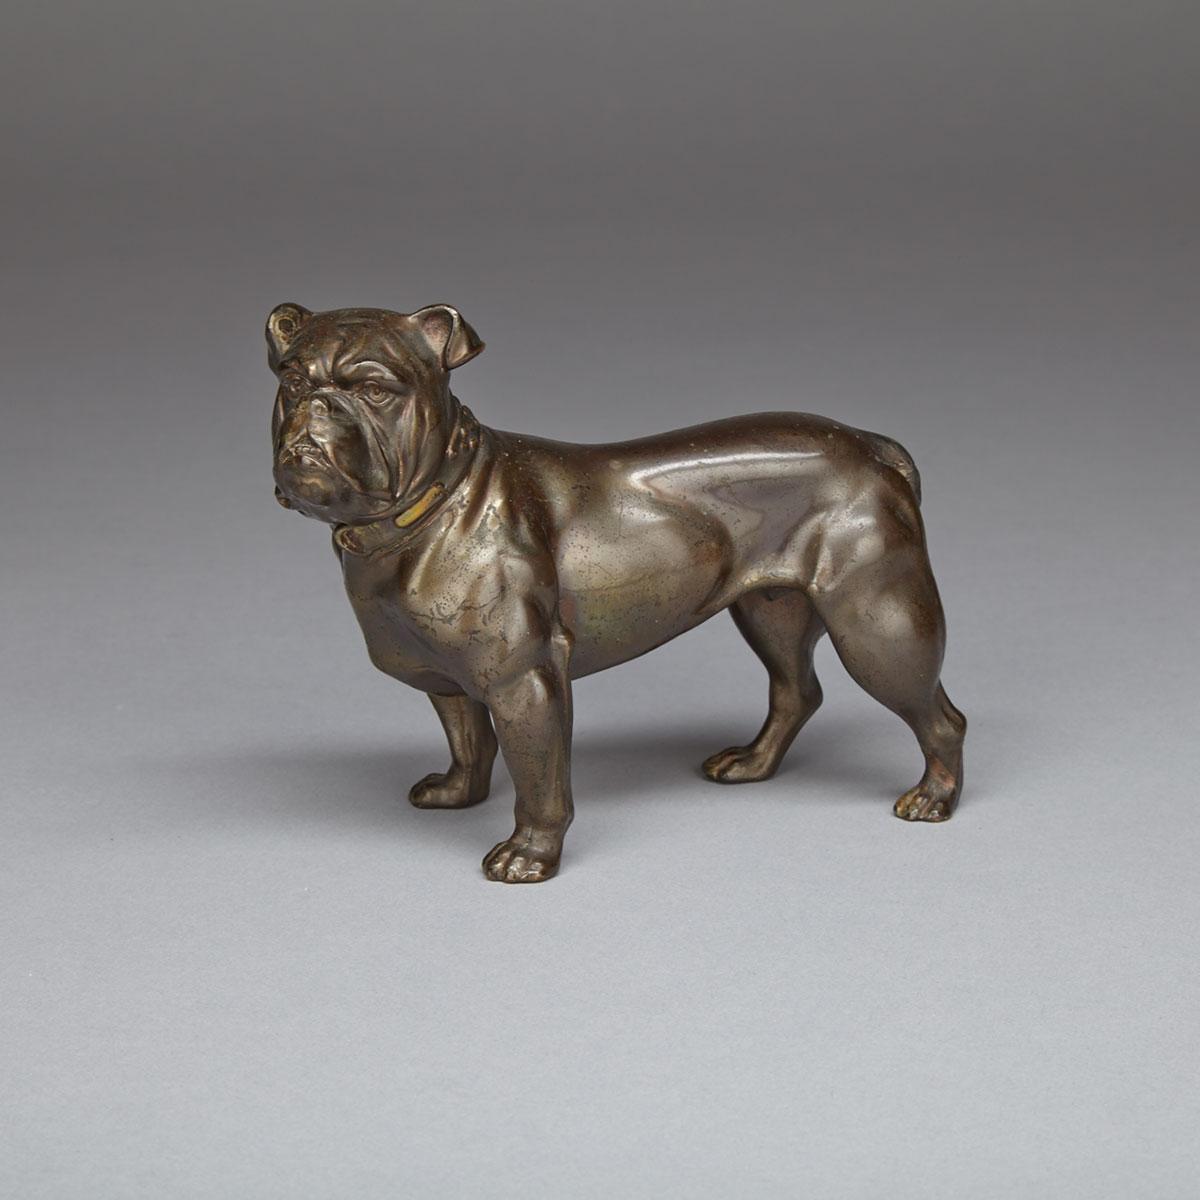 Patinated Bronze Model of a Bulldog, early-mid 20th century